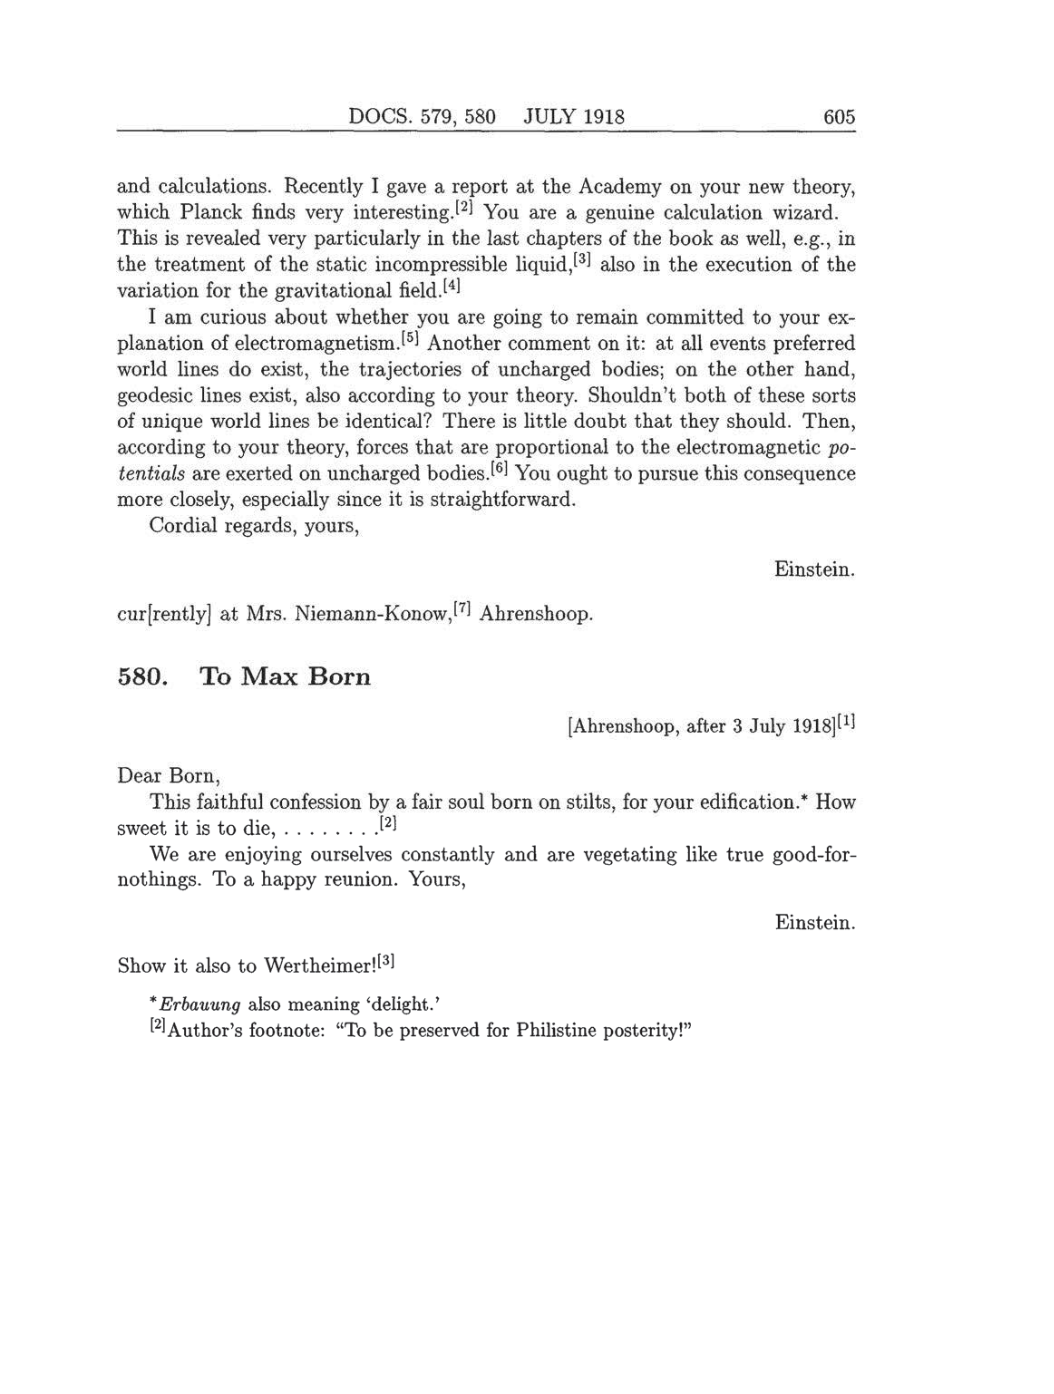 Volume 8: The Berlin Years: Correspondence, 1914-1918 (English translation supplement) page 605